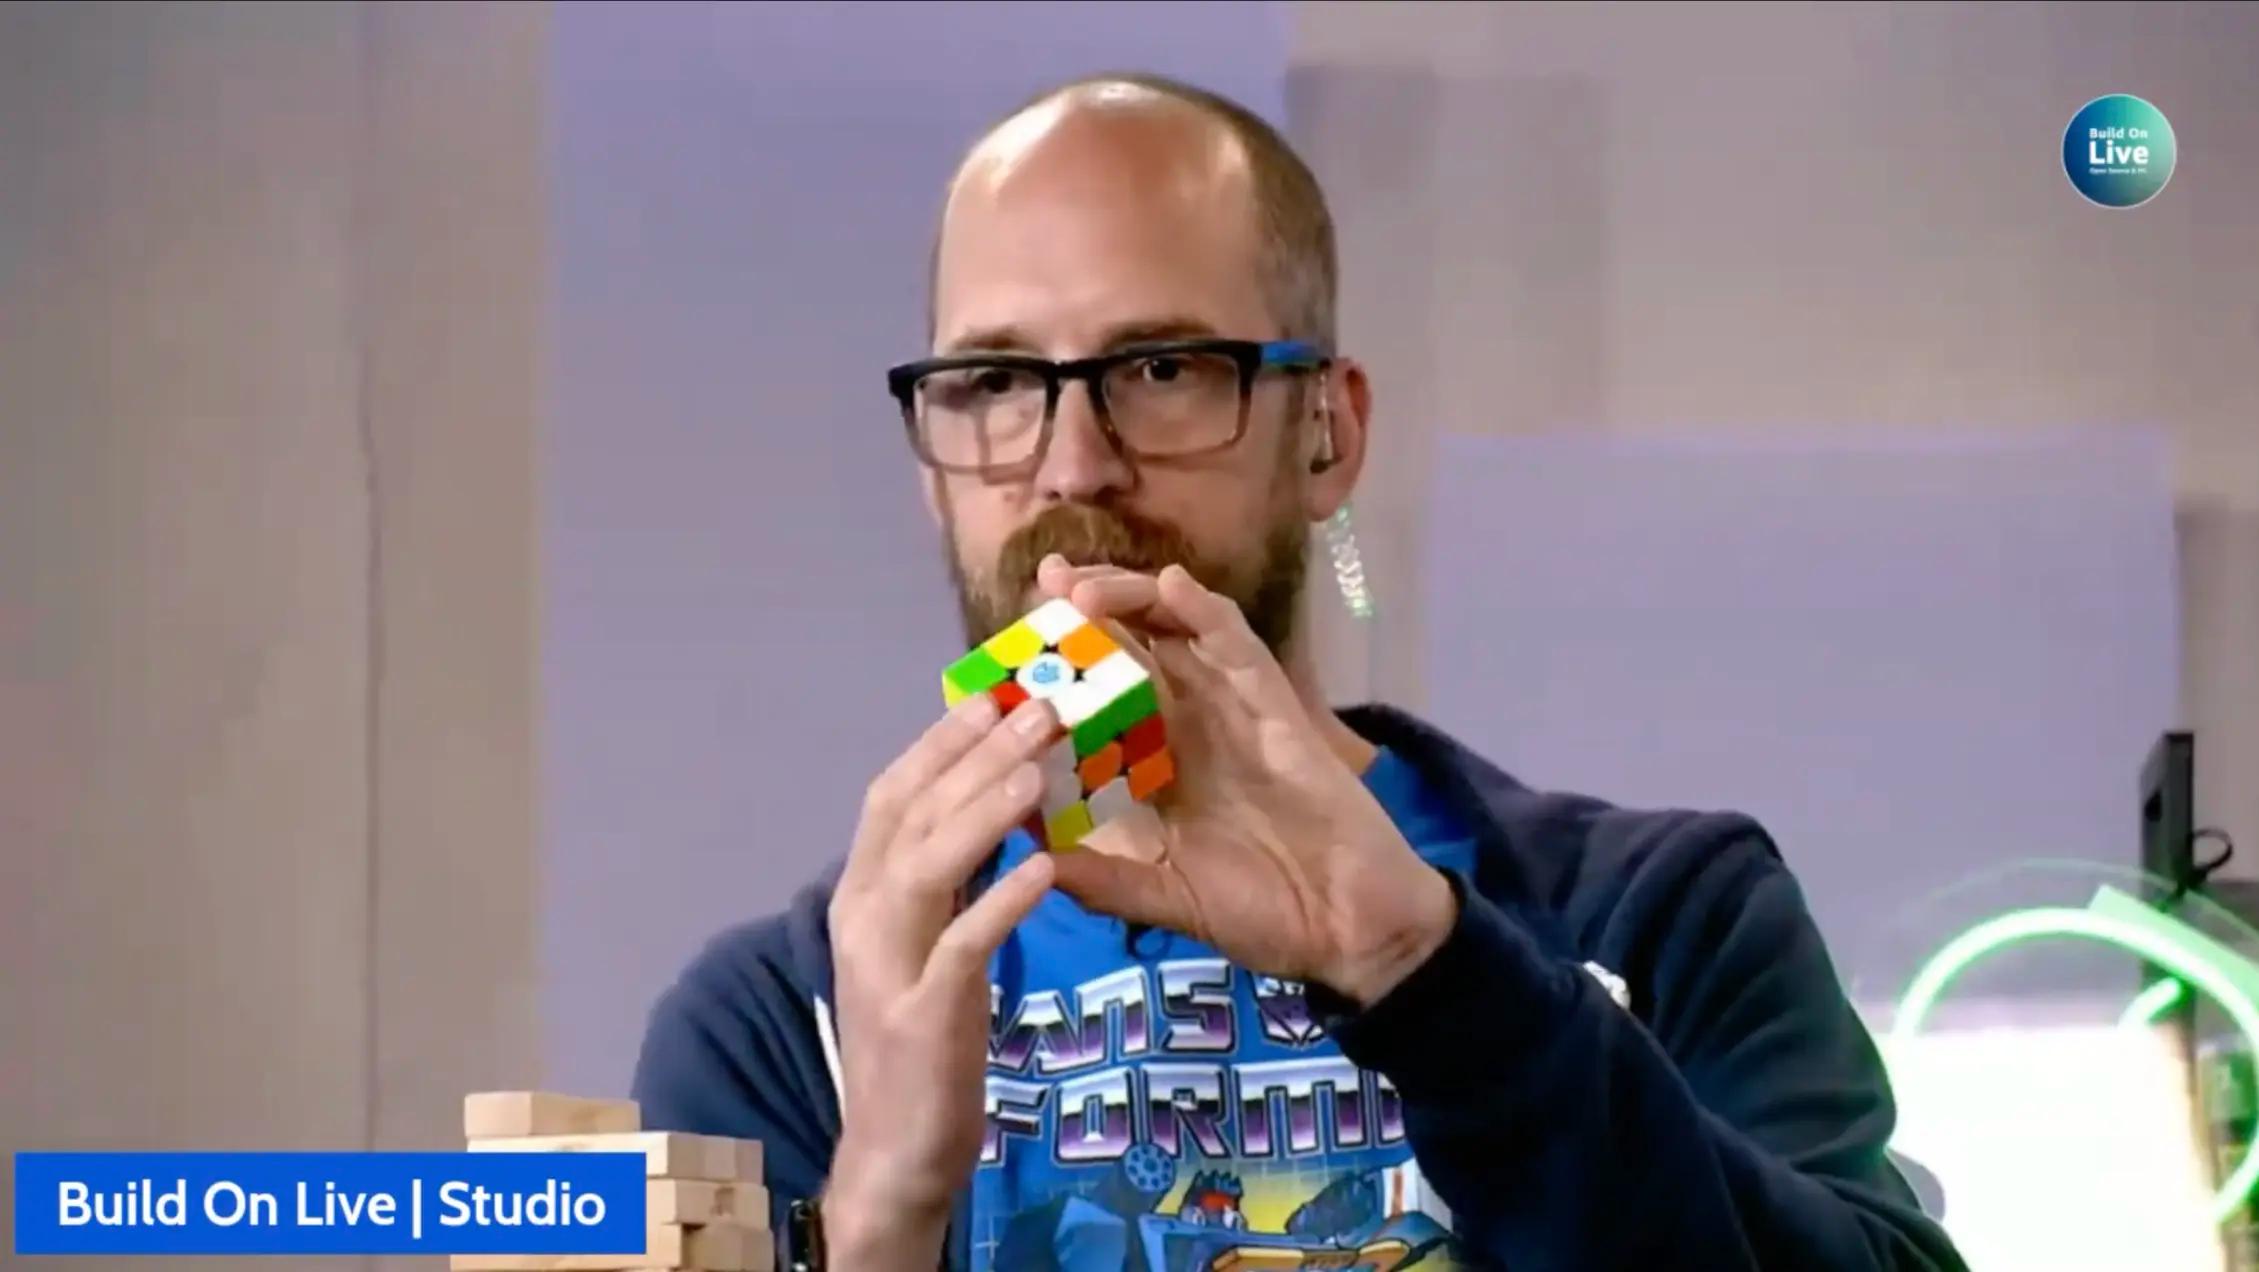 Mike solves a Rubiks cube for us